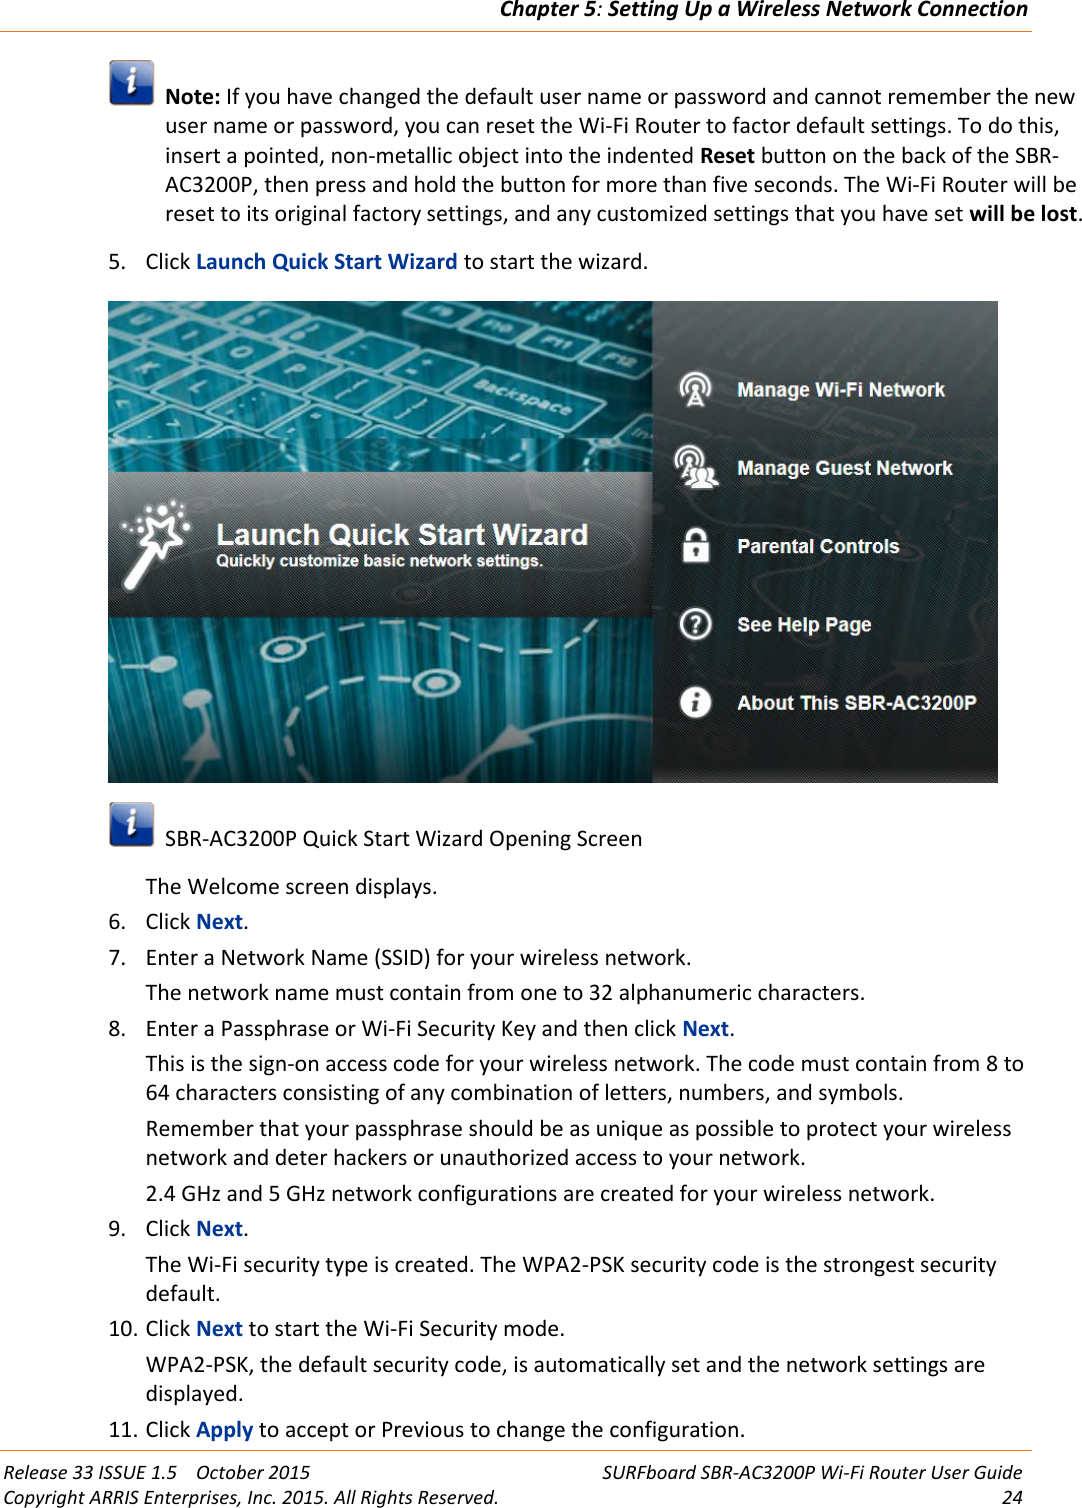 Chapter 5:Setting Up a Wireless Network ConnectionRelease 33 ISSUE 1.5 October 2015 SURFboard SBR-AC3200P Wi-Fi Router User GuideCopyright ARRIS Enterprises, Inc. 2015. All Rights Reserved. 24Note: If you have changed the default user name or password and cannot remember the newuser name or password, you can reset the Wi-Fi Router to factor default settings. To do this,insert a pointed, non-metallic object into the indented Reset button on the back of the SBR-AC3200P, then press and hold the button for more than five seconds. The Wi-Fi Router will bereset to its original factory settings, and any customized settings that you have set will be lost.5. Click Launch Quick Start Wizard to start the wizard.SBR-AC3200P Quick Start Wizard Opening ScreenThe Welcome screen displays.6. Click Next.7. Enter a Network Name (SSID) for your wireless network.The network name must contain from one to 32 alphanumeric characters.8. Enter a Passphrase or Wi-Fi Security Key and then click Next.This is the sign-on access code for your wireless network. The code must contain from 8 to64 characters consisting of any combination of letters, numbers, and symbols.Remember that your passphrase should be as unique as possible to protect your wirelessnetwork and deter hackers or unauthorized access to your network.2.4 GHz and 5 GHz network configurations are created for your wireless network.9. Click Next.The Wi-Fi security type is created. The WPA2-PSK security code is the strongest securitydefault.10. Click Next to start the Wi-Fi Security mode.WPA2-PSK, the default security code, is automatically set and the network settings aredisplayed.11. Click Apply to accept or Previous to change the configuration.